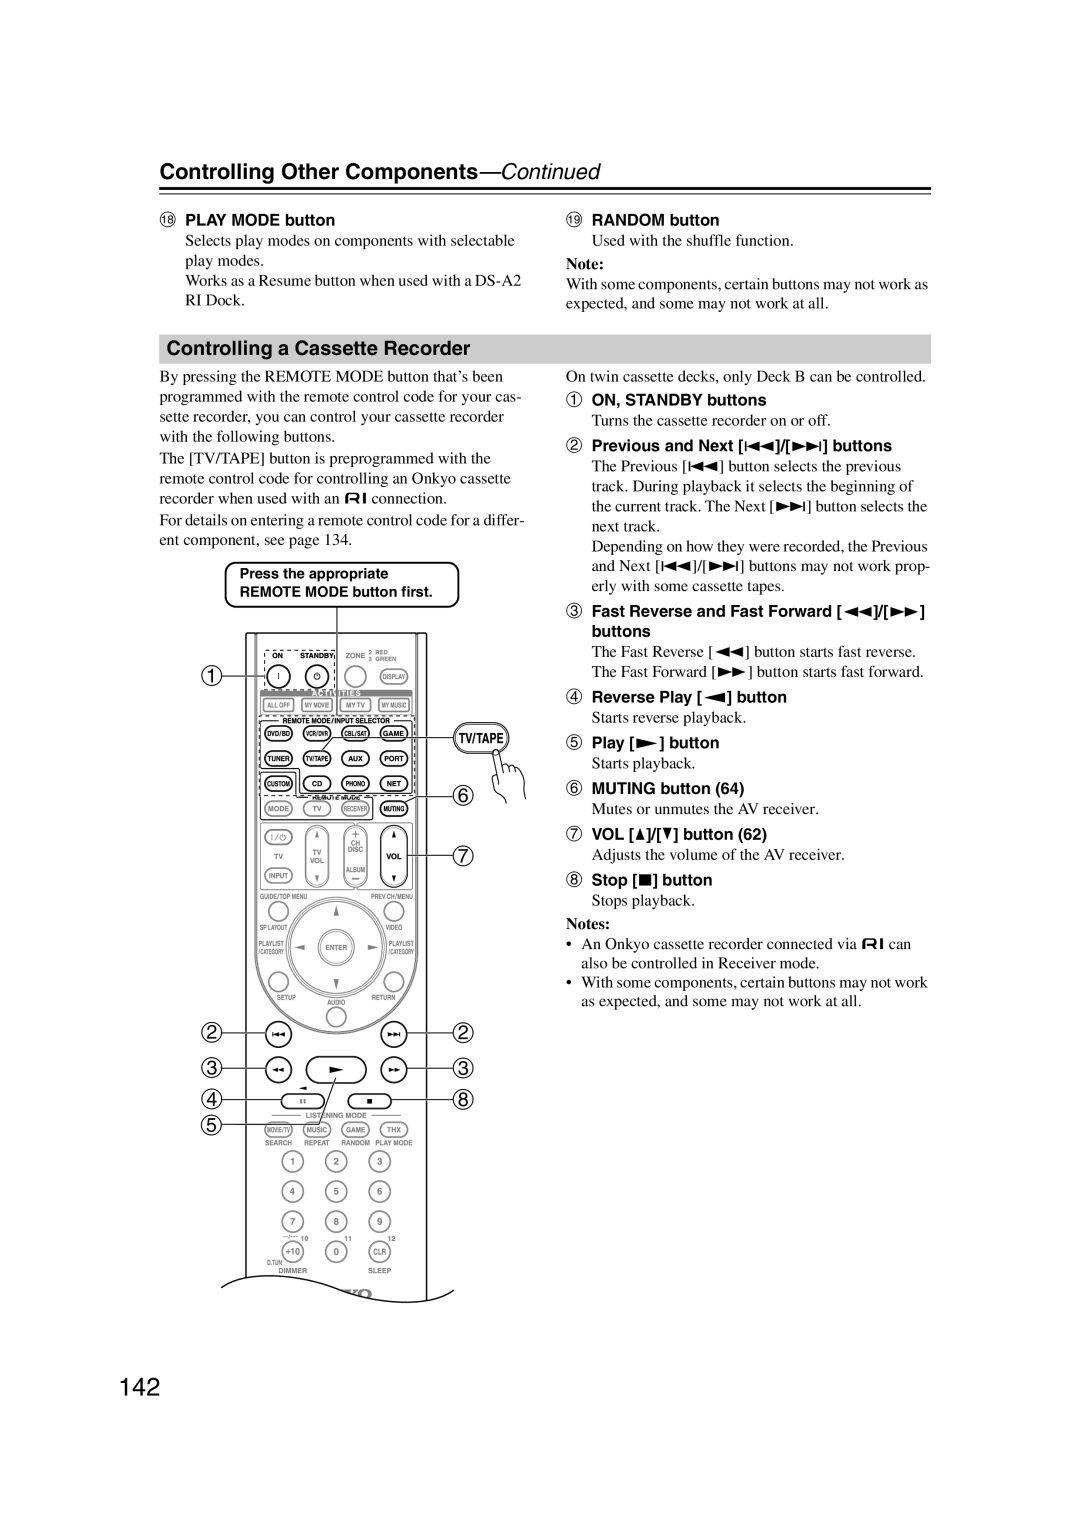 Onkyo TX-NR1007 instruction manual Controlling a Cassette Recorder, Controlling Other Components—Continued, Notes 